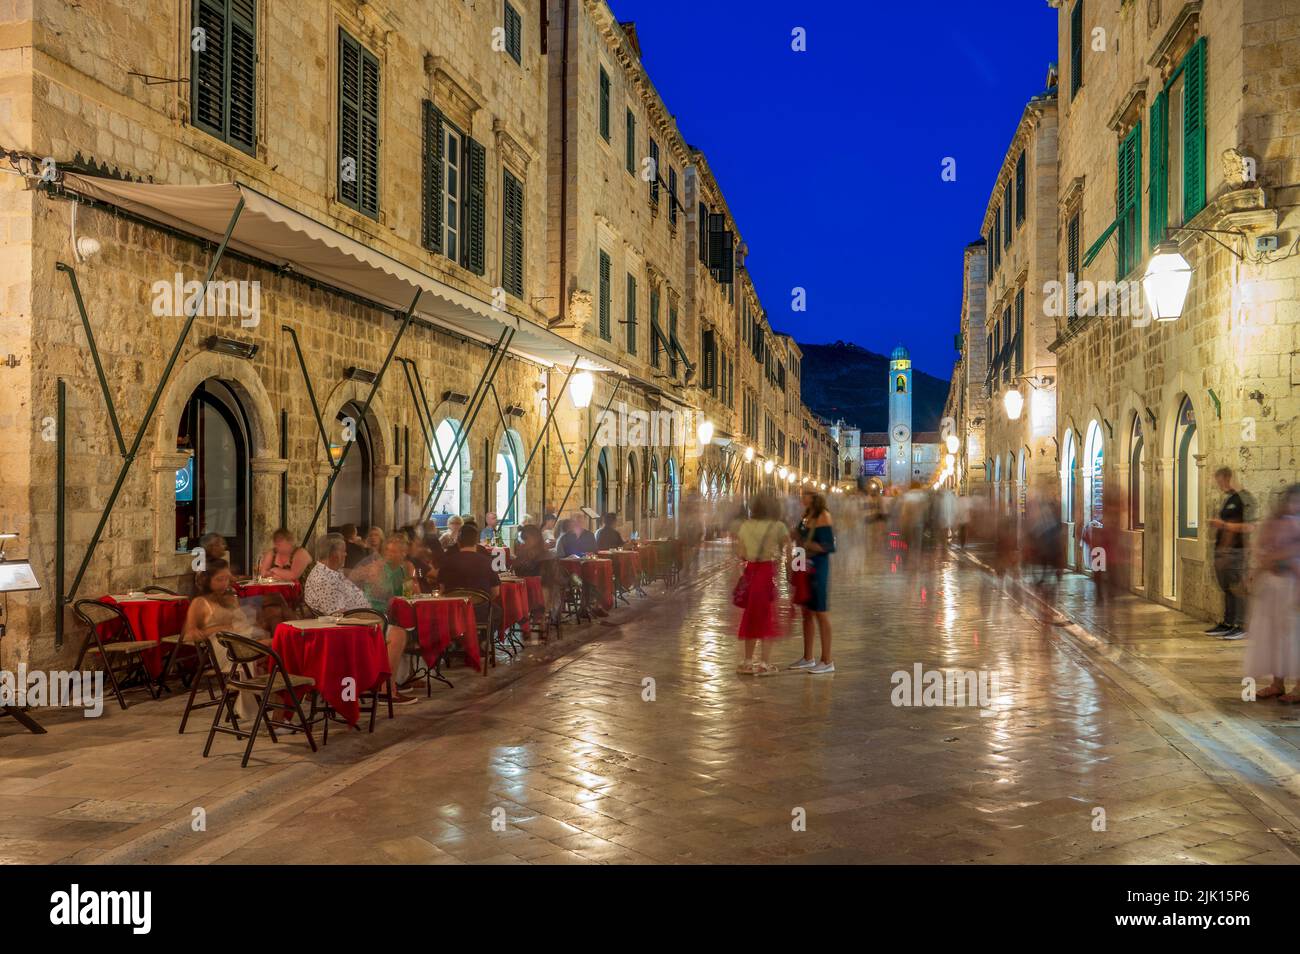 People eating at outdoor restaurant at dusk in the old town, UNESCO World Heritage Site, Dubrovnik, Croatia, Europe Stock Photo